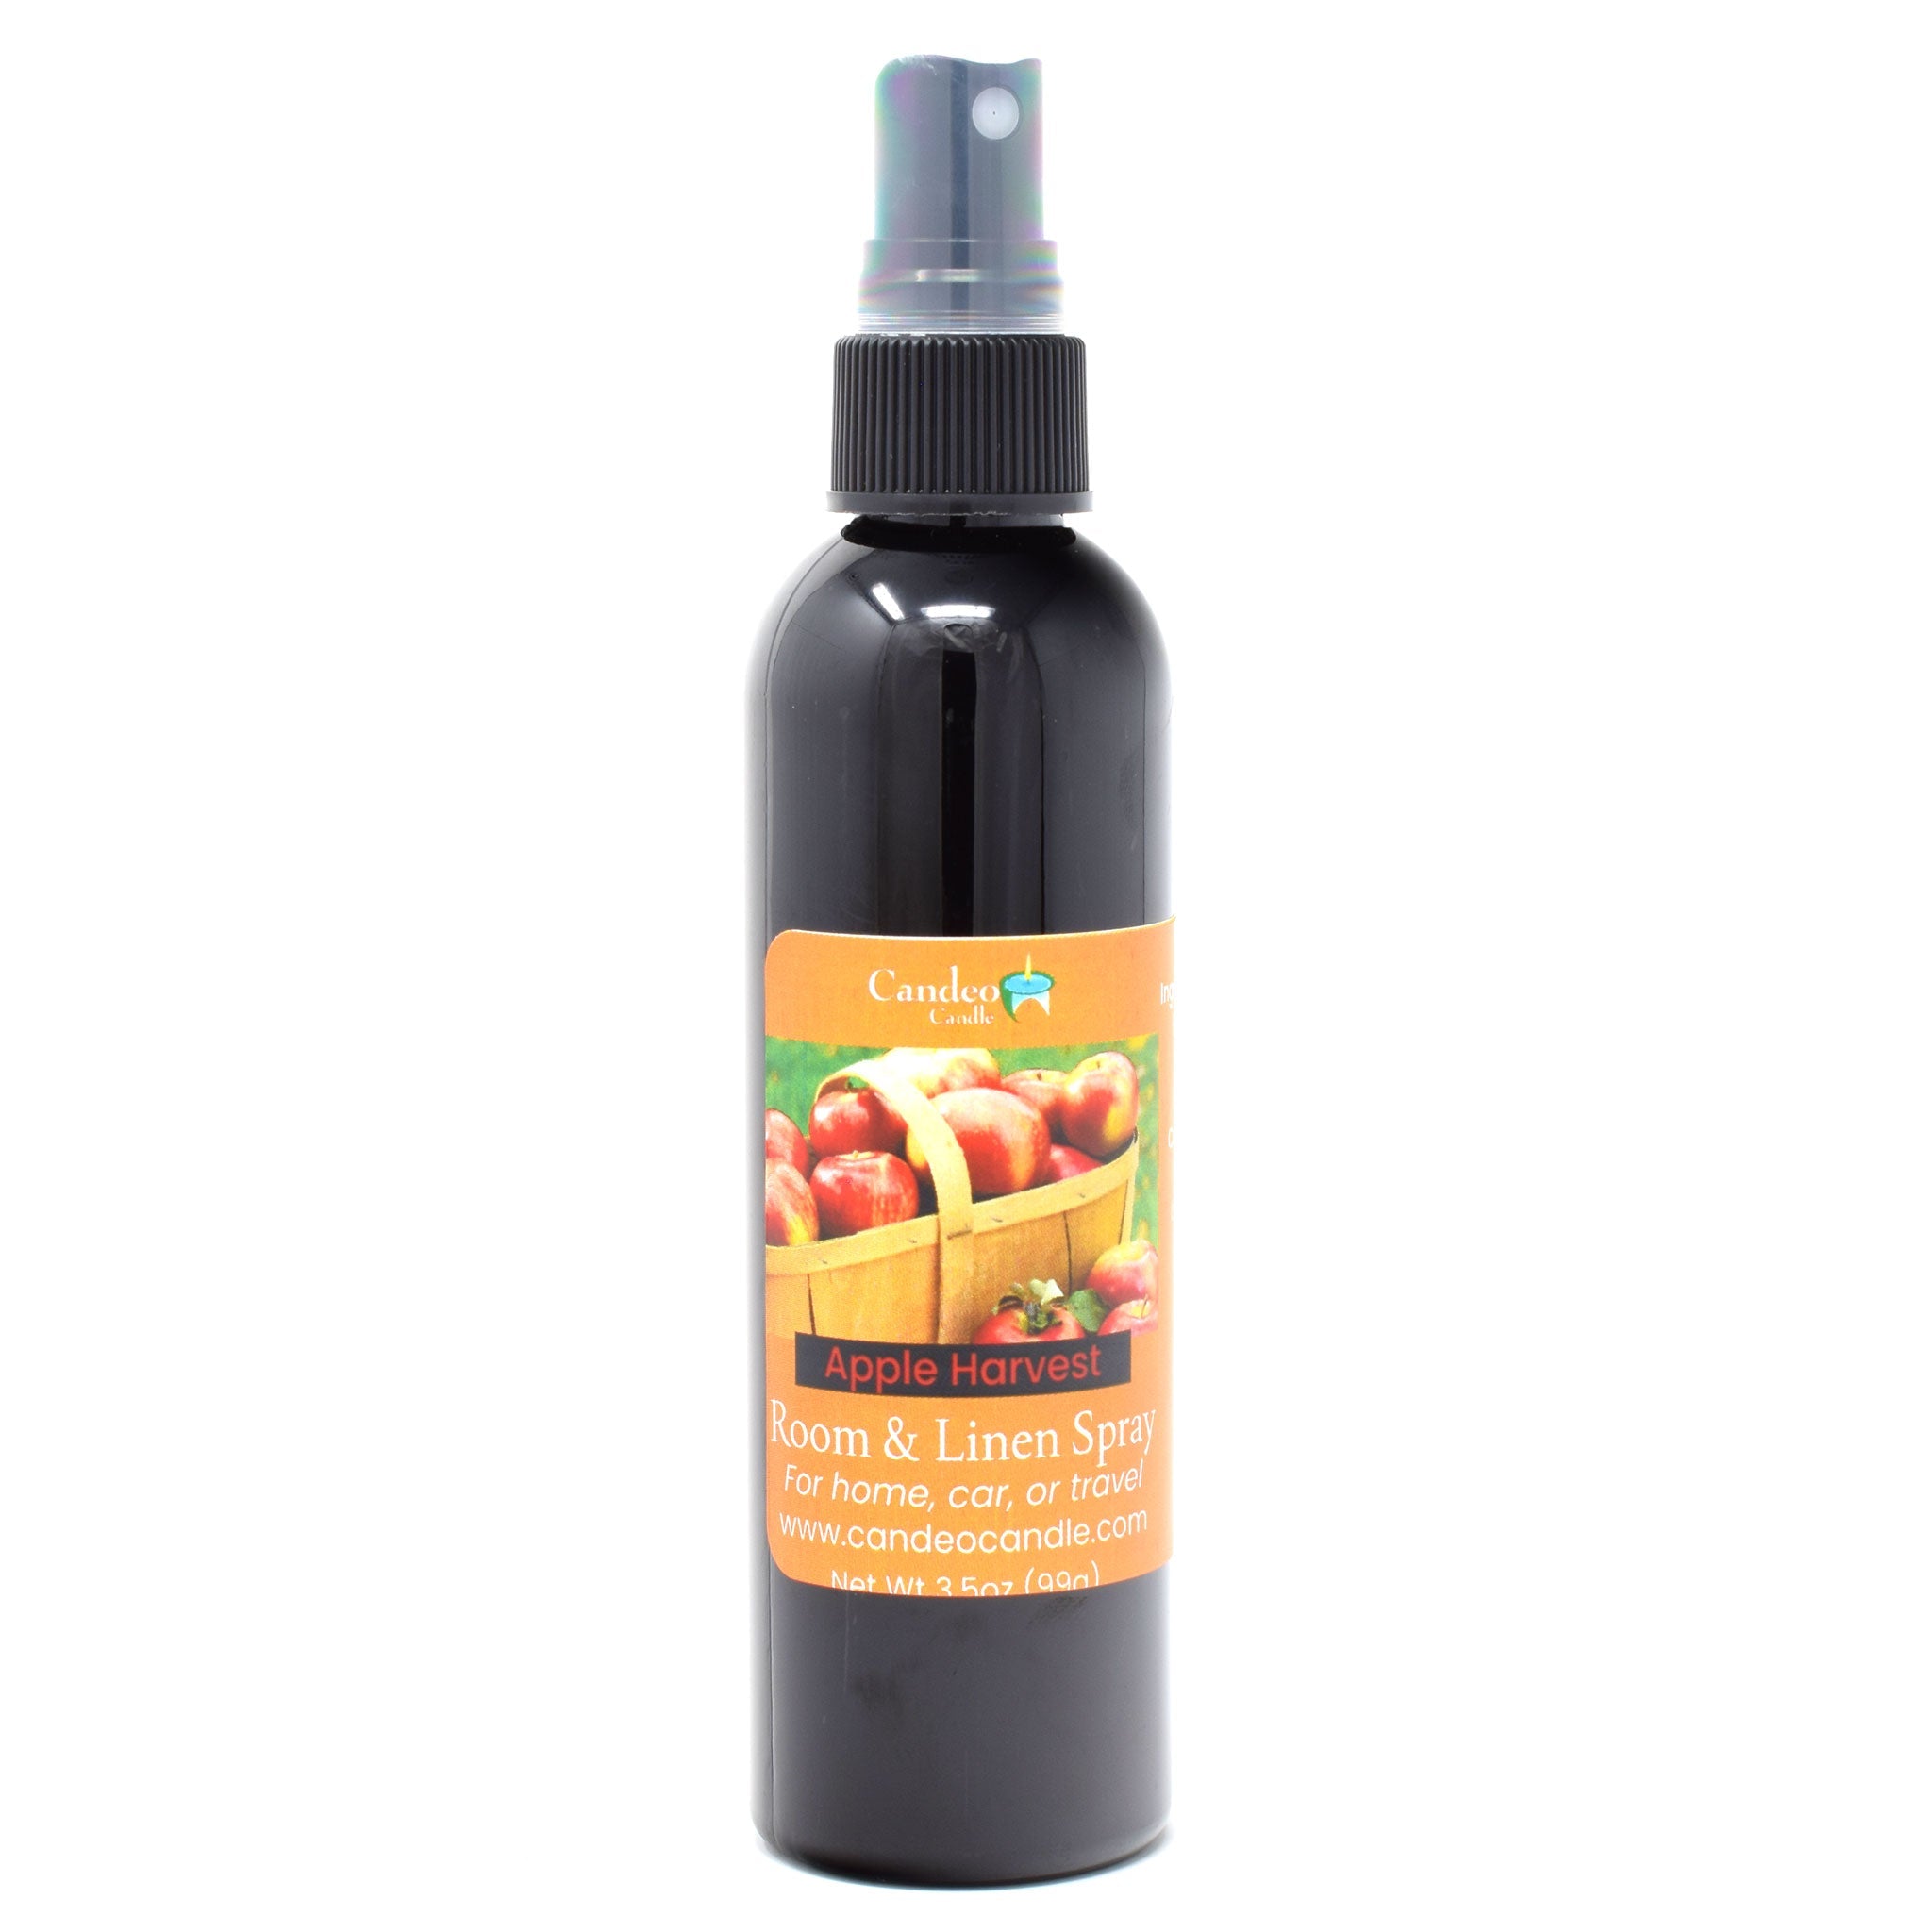 Apple Harvest, 3.5 oz Room Spray - Candeo Candle